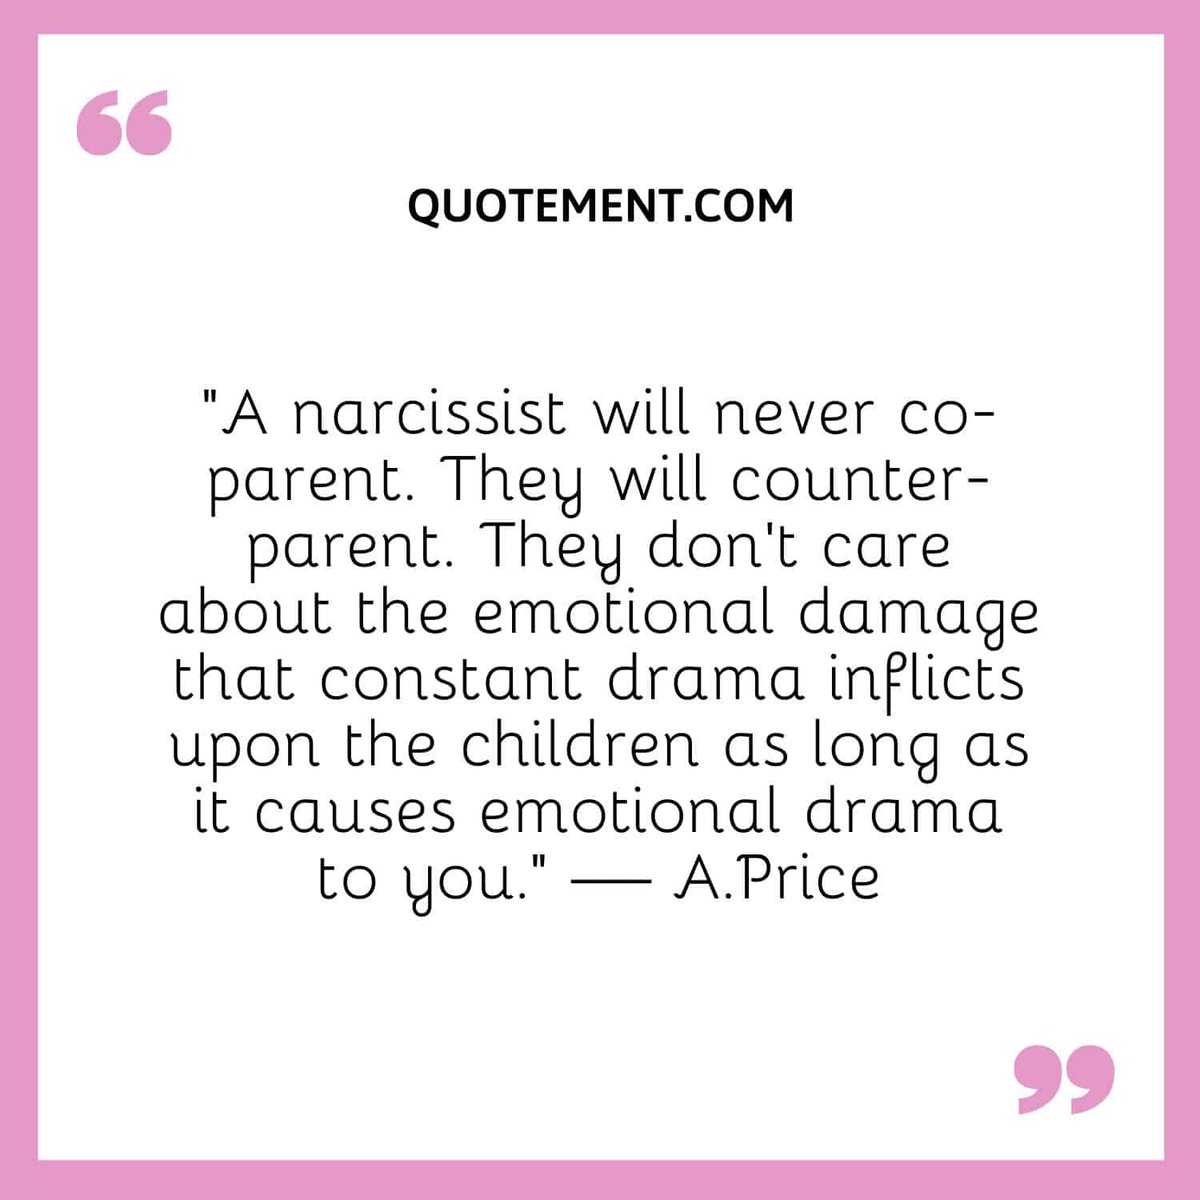 Imagine thinking you can do no wrong , while simultaneously fucking up your kids’ lives. #Narcissist #narcissism #NarcissisticParents #yikes #getsomehelp